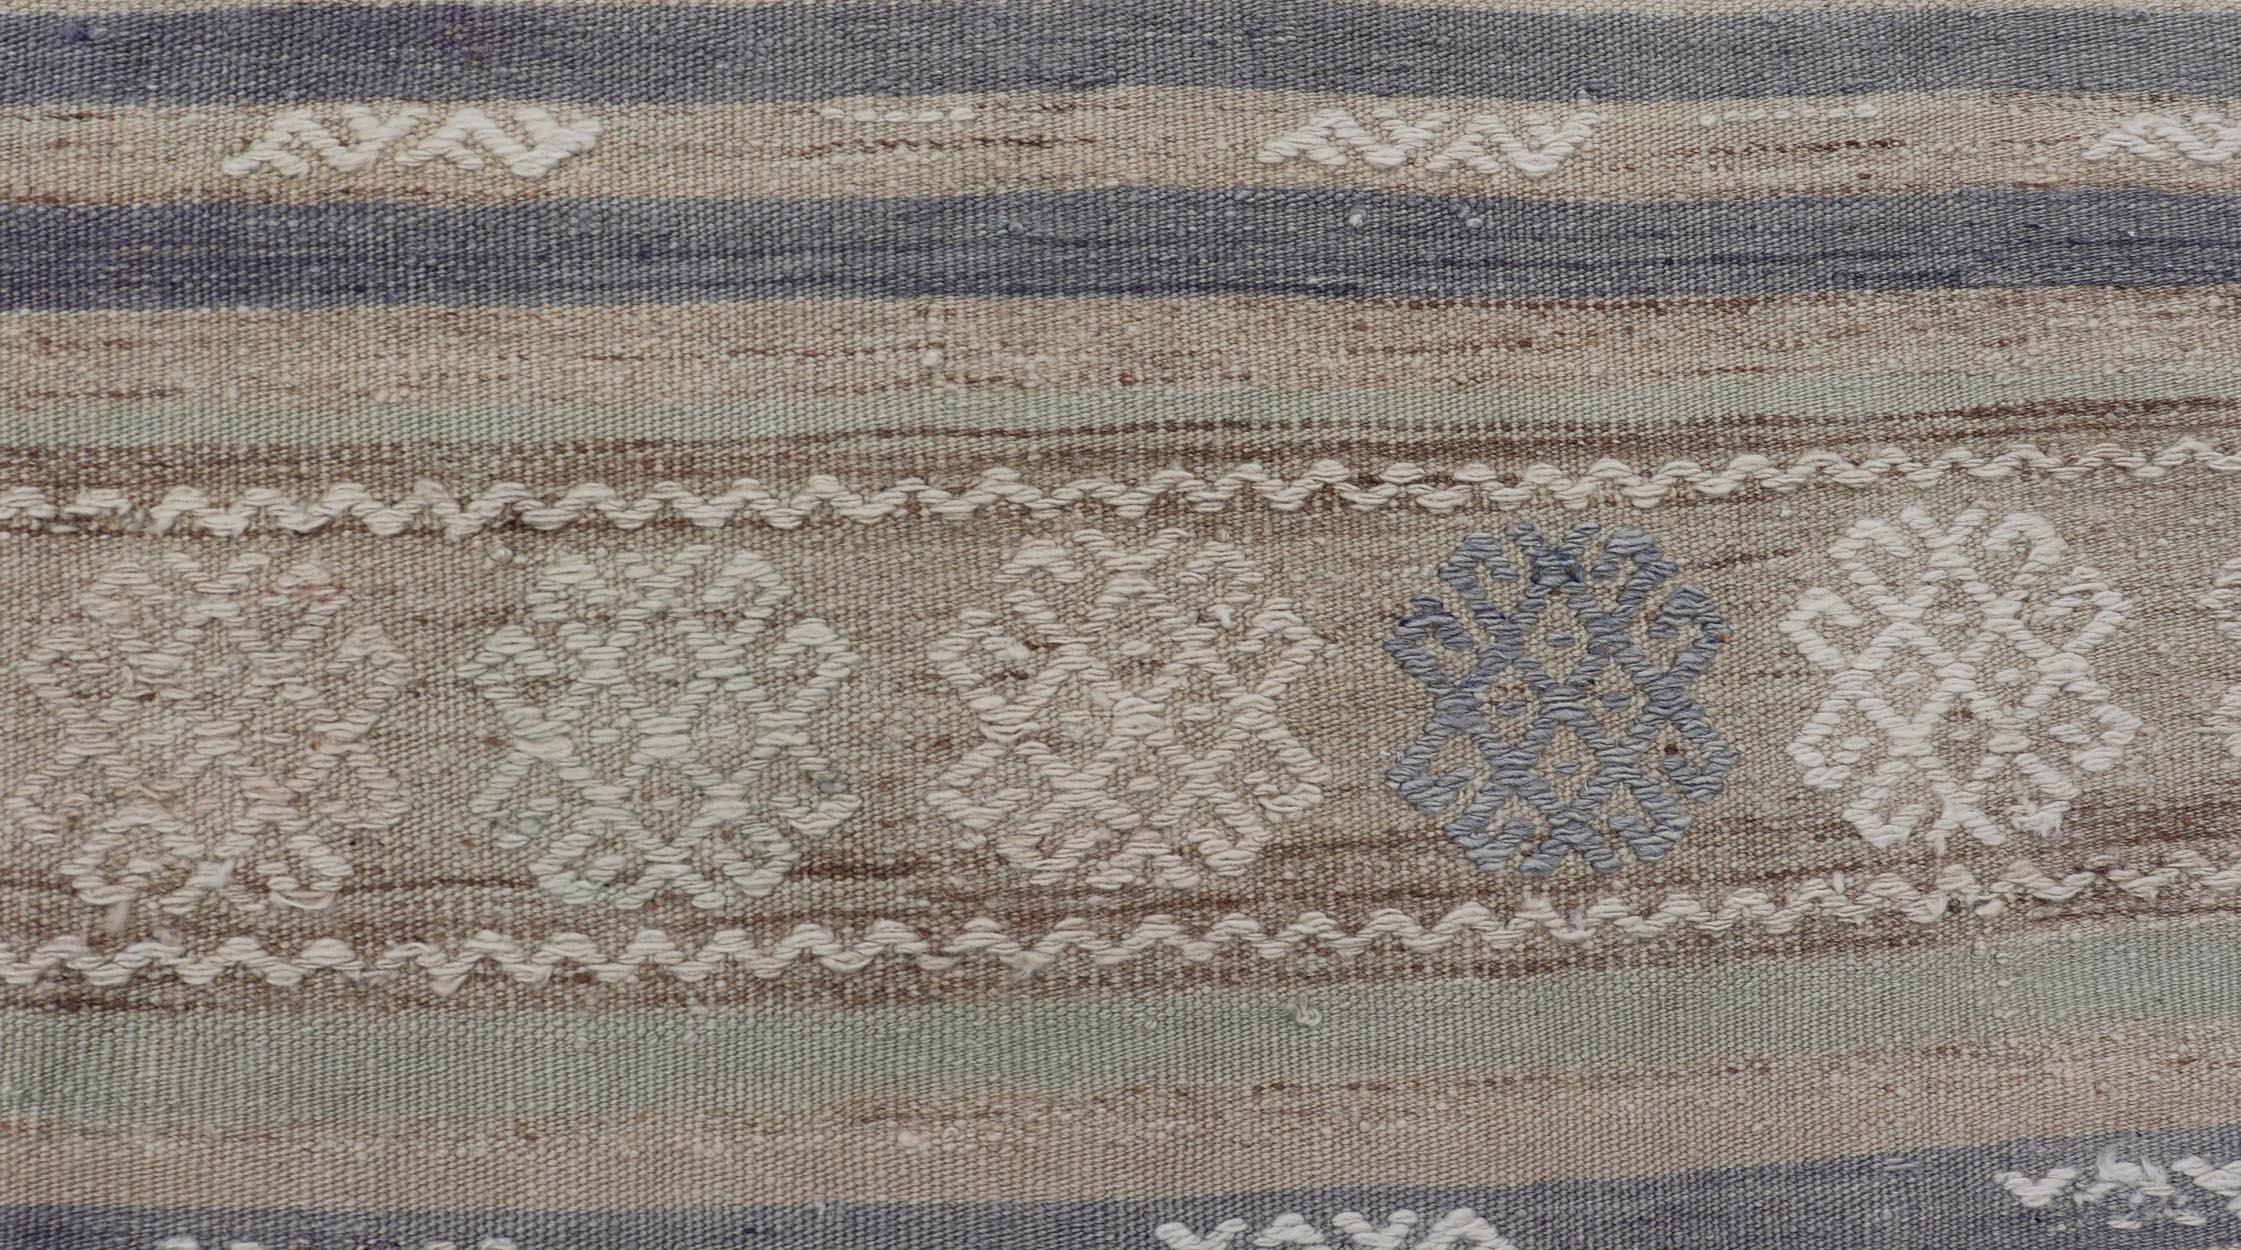 Wool Striped Hand Woven Turkish Vintage Kilim with Geometric Designs For Sale